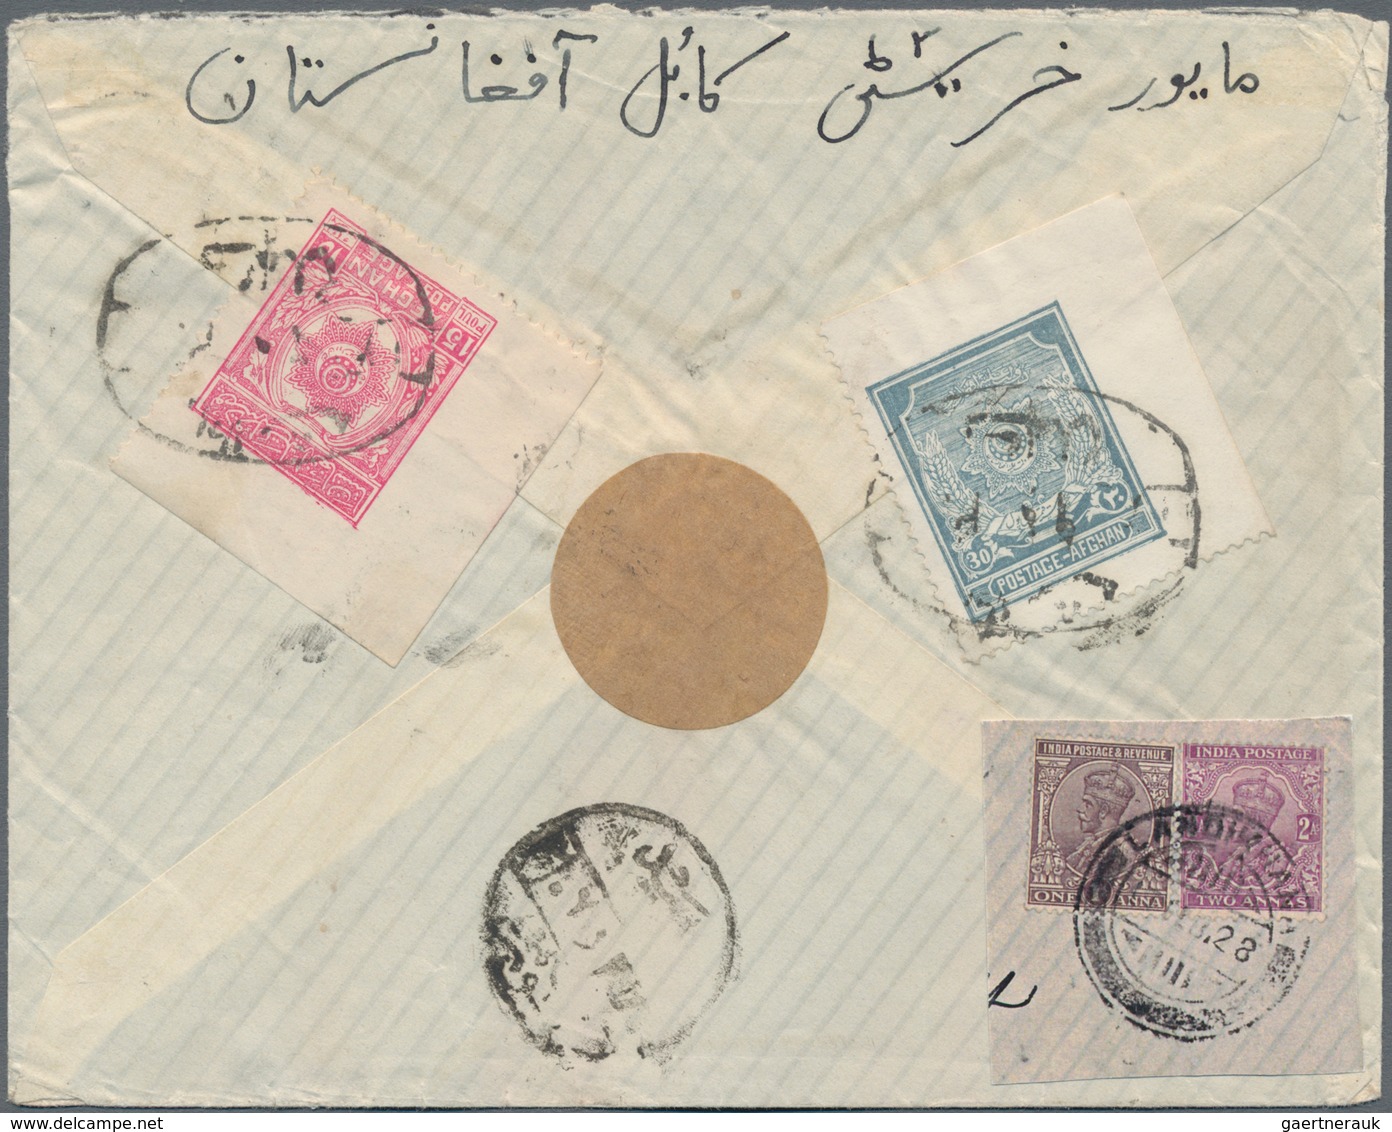 Afghanistan: 1928, 9.2. Letter To Munich With Double Franking Afghanistan And 1 Anna KE VII Two Stam - Afganistán